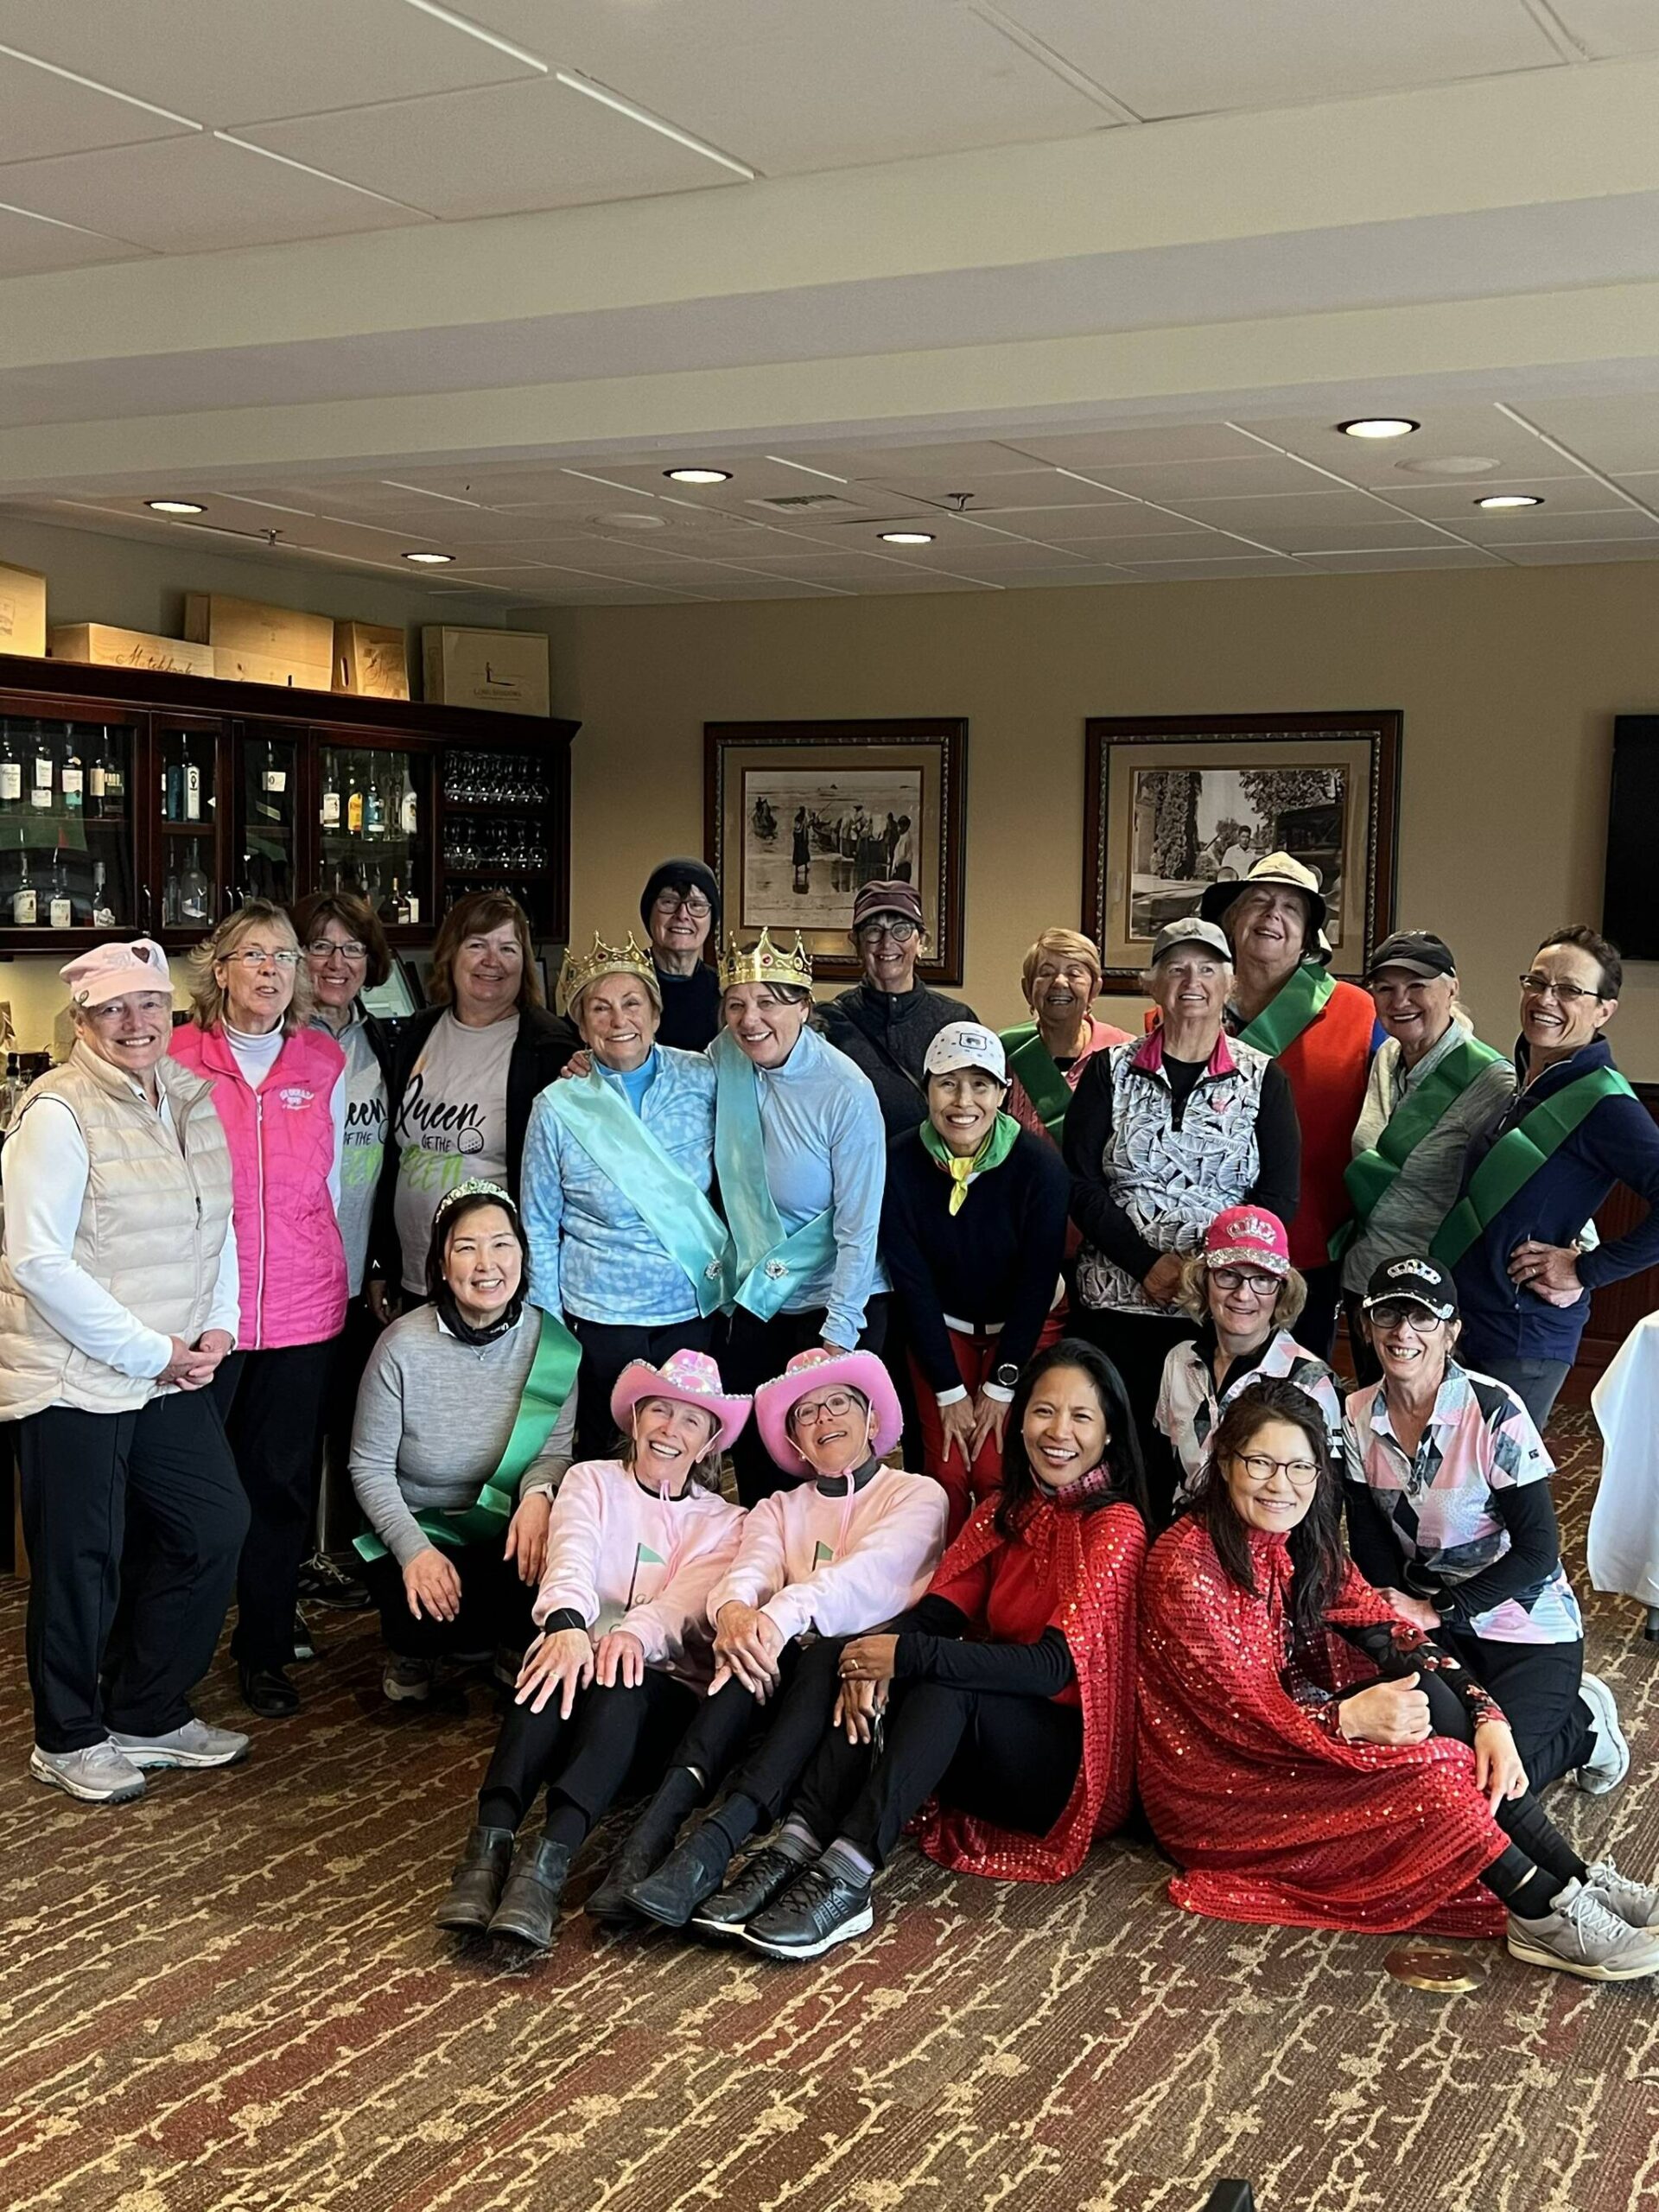 The Cedars at Dungeness Women’s 18-hole golf group held their annual Member/Member Golf Tournament on Tuesday with 20 players braving the elements while playing a game of Queen’s of the Green. The pairings of Mimi Shin and Jane Peoples and Lori Wyngaert and Lori Oaks tied for the top spot while Lisa Chon and Carin Bunney were second and Bobbie Piety and Yoon Park third. Marlene Hirschfeld and Judy Reno won Best Costume.